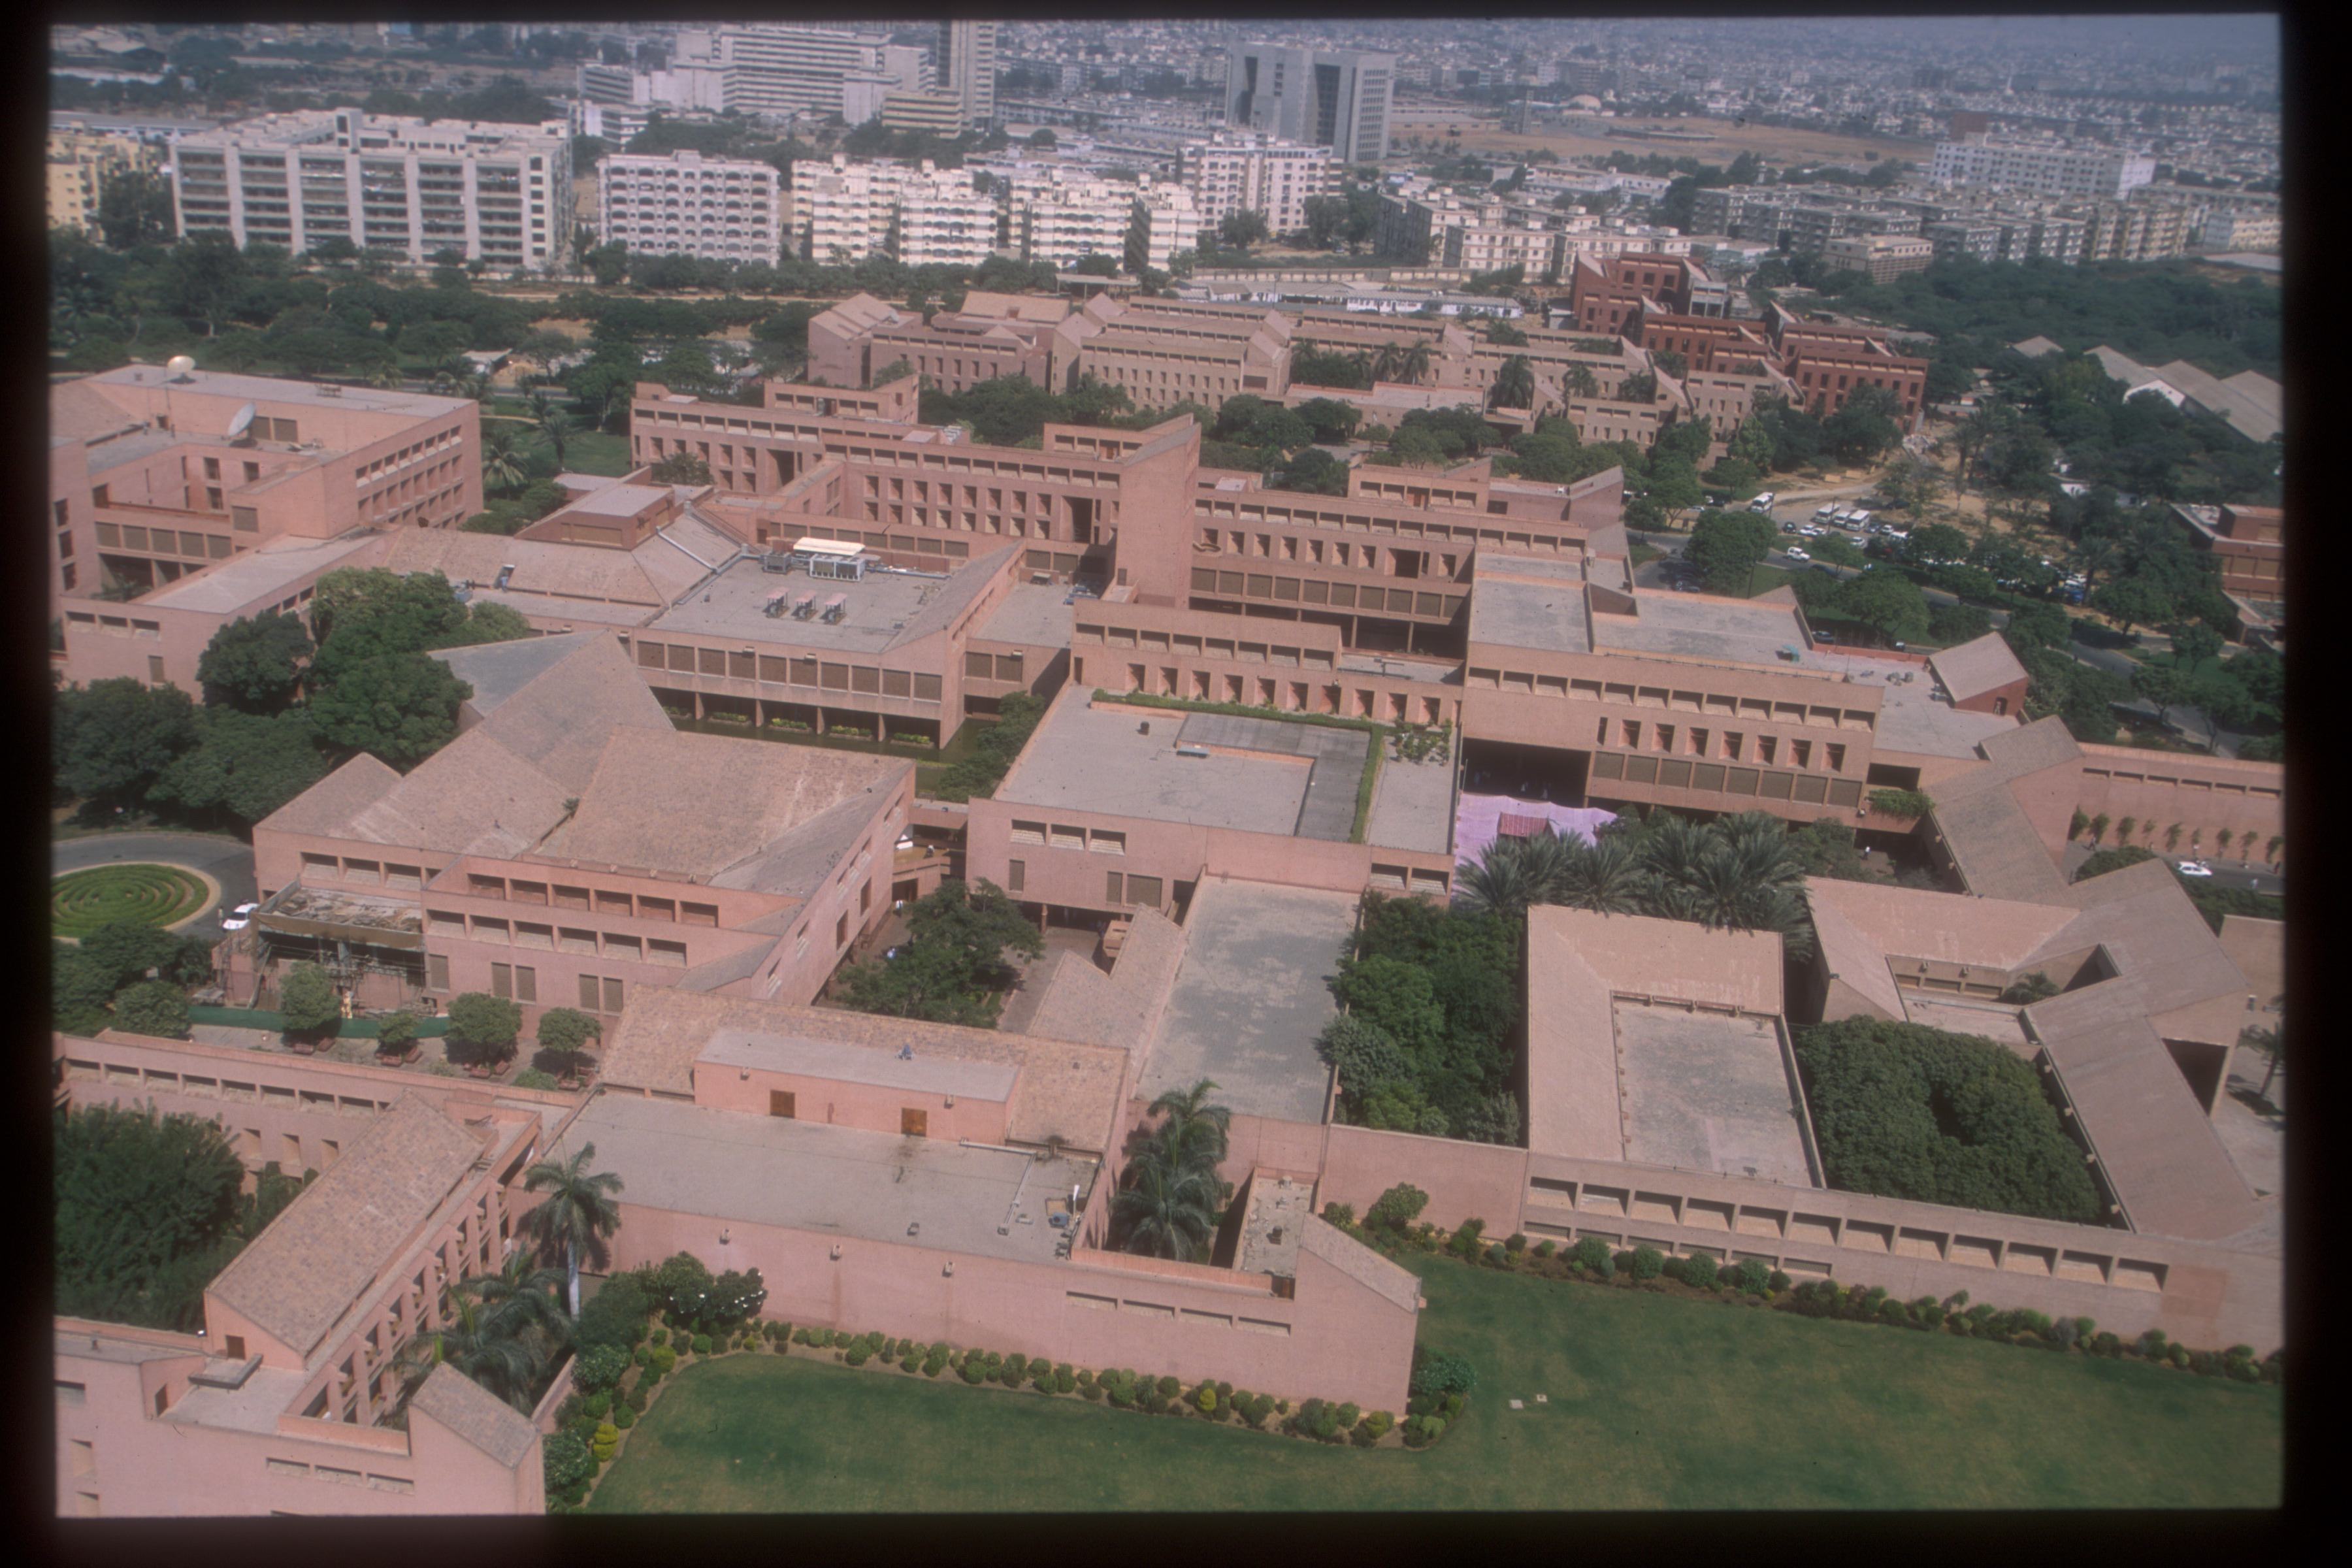 Aga Khan University - Aerial view over the campus